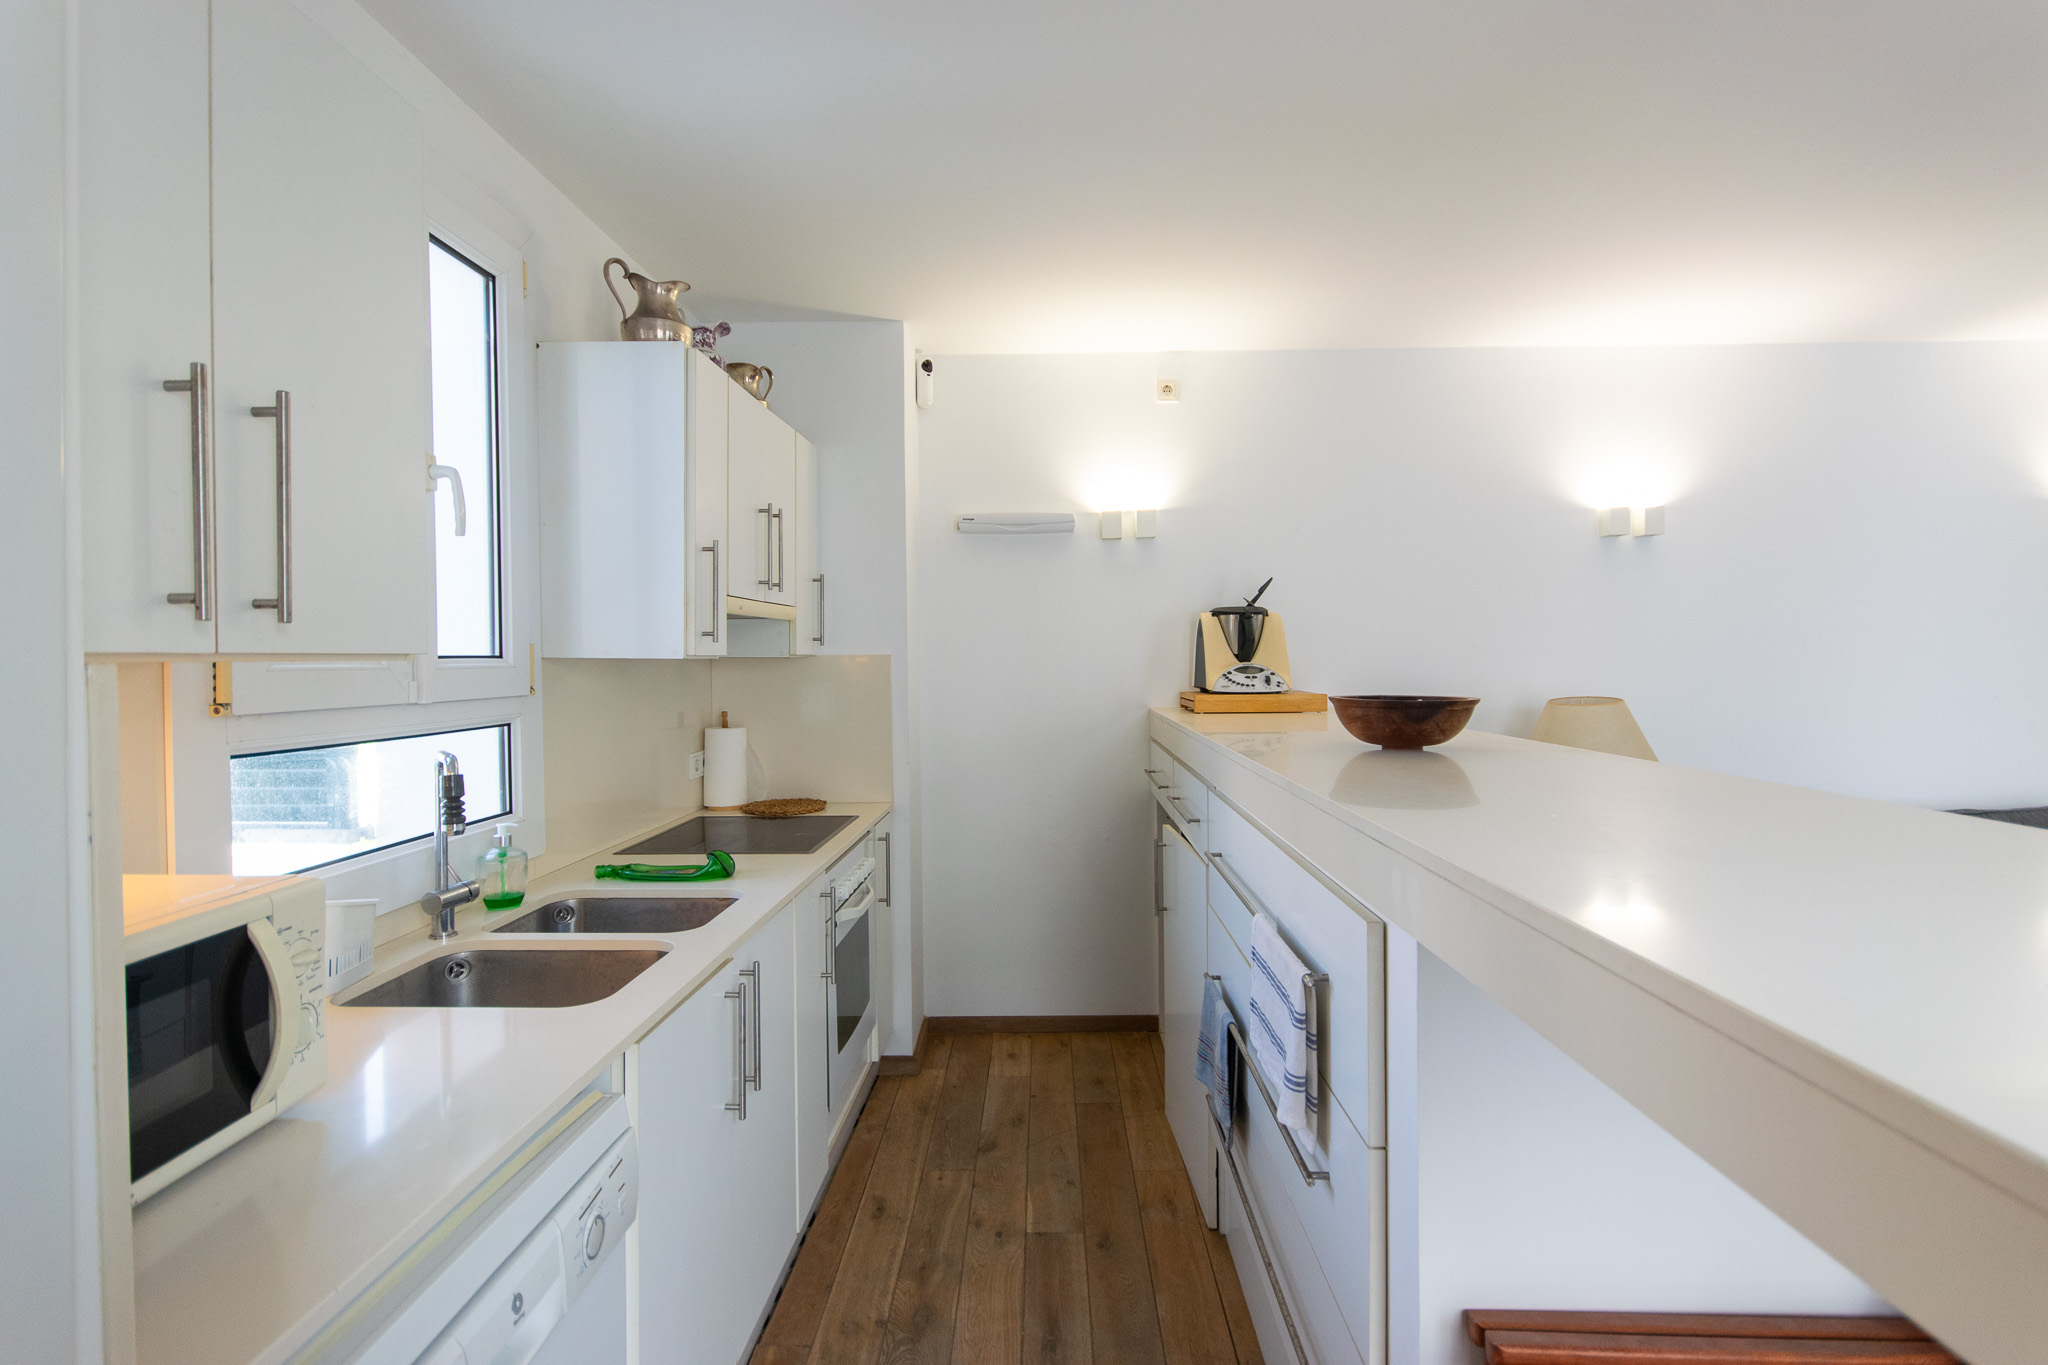 Open kitchen of centrally located town house in Es Mercadal